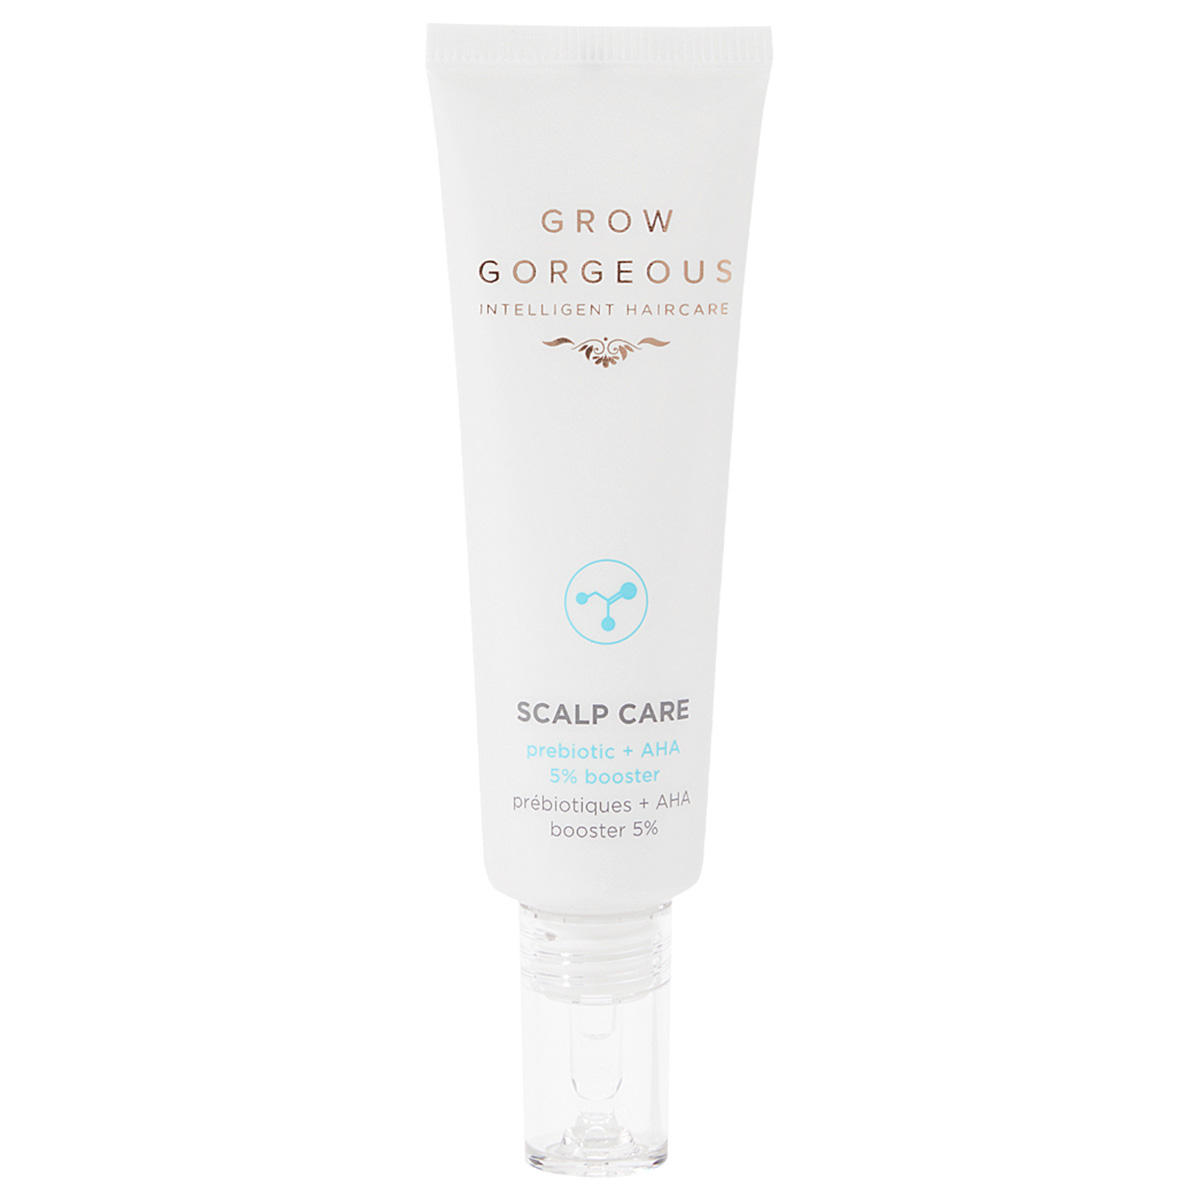 GROW GORGEOUS Scalp Care Purifying Prebiotic + AHA 5% Booster 30 ml - 1